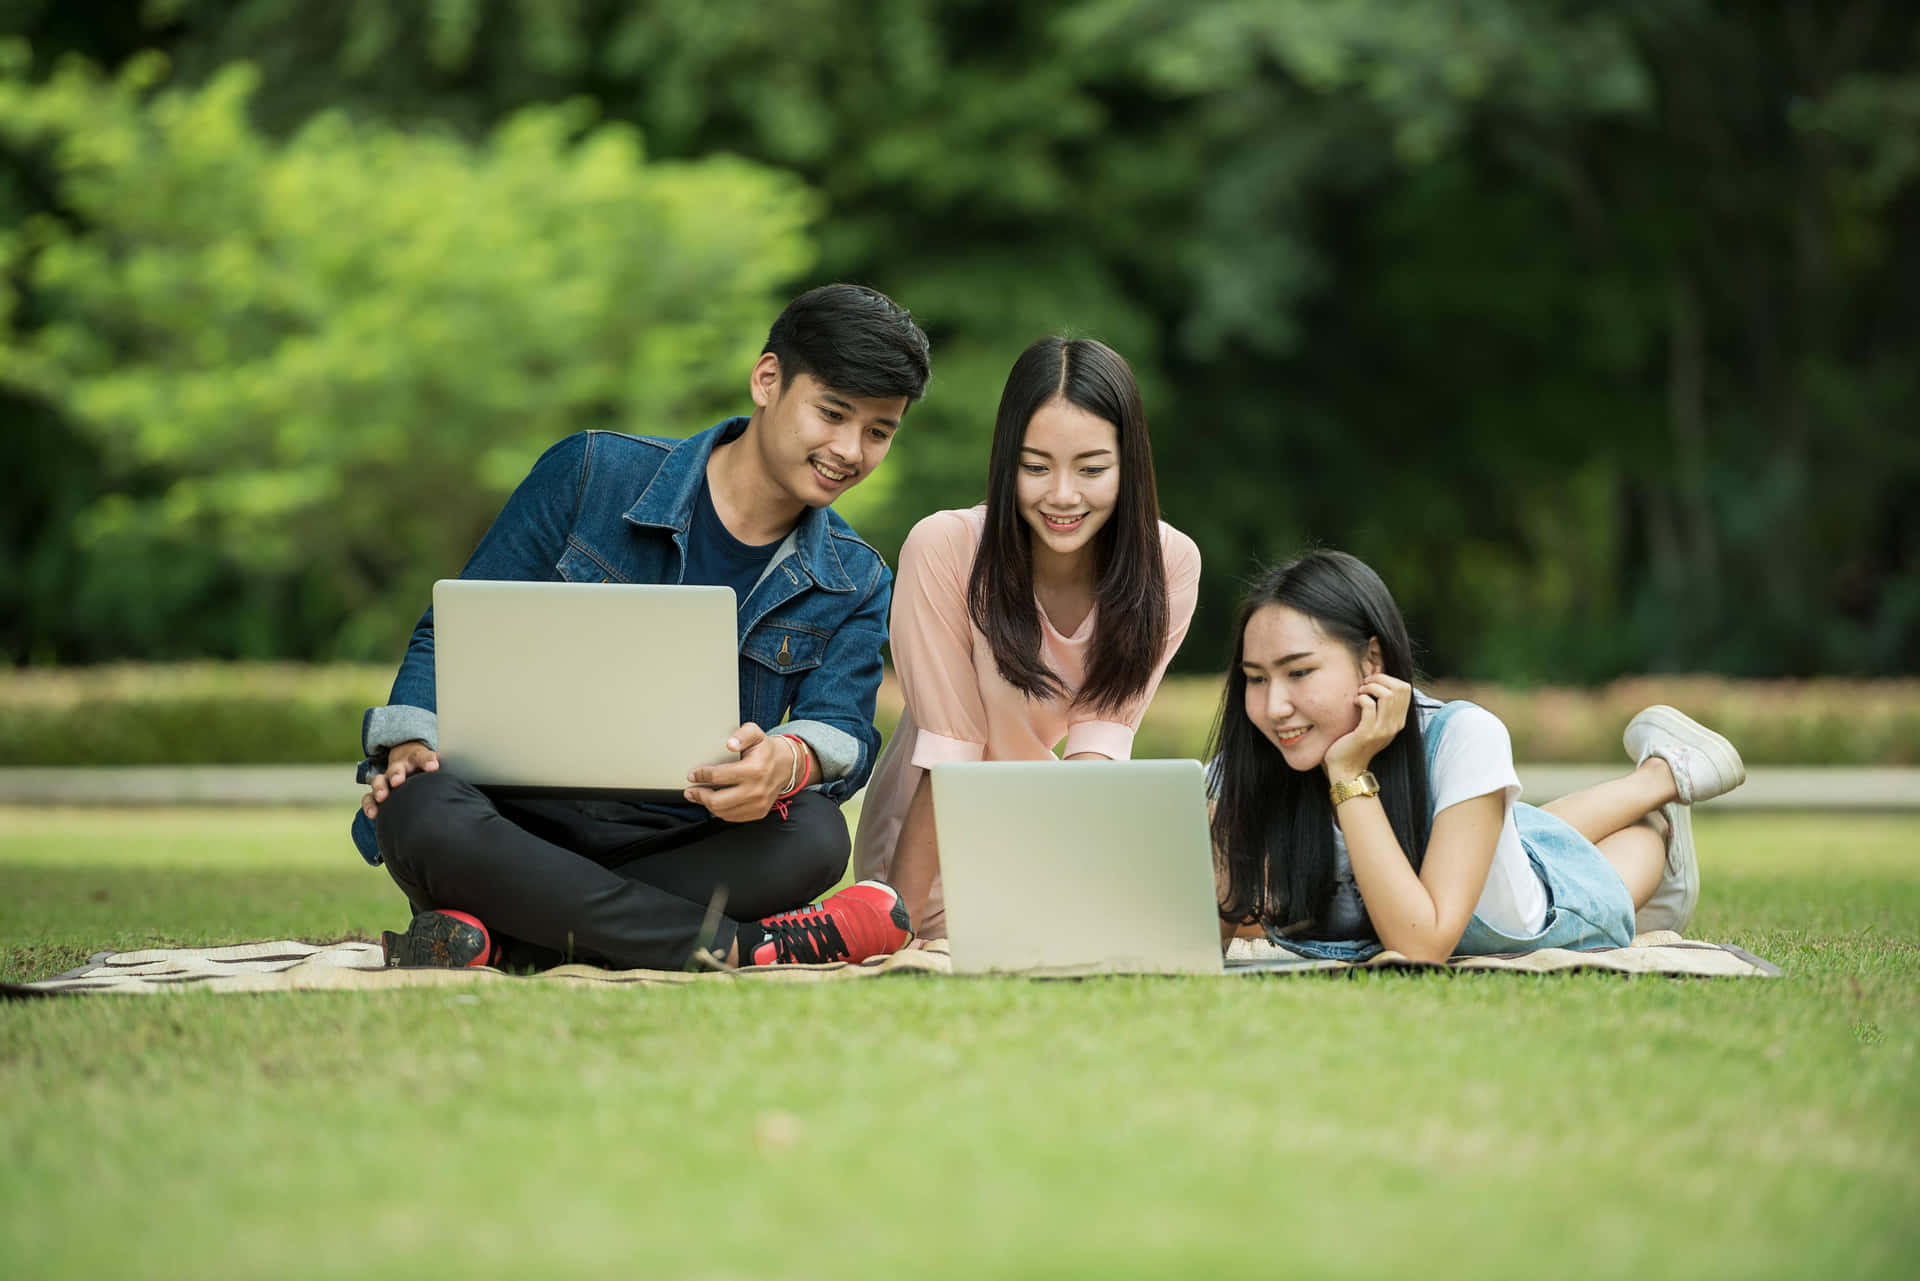 Students Studying Outdoors With Laptops.jpg Background